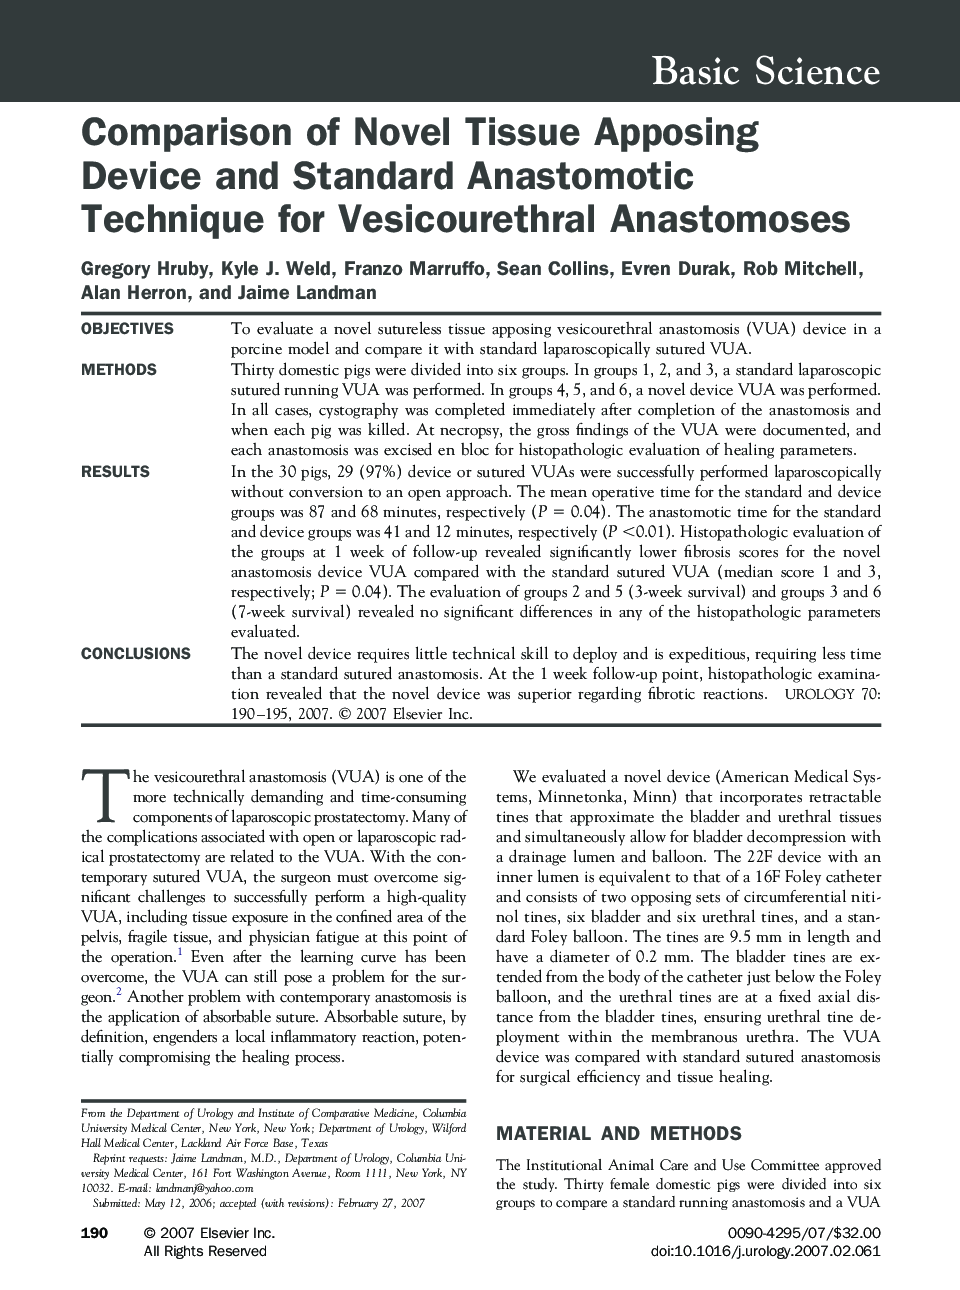 Comparison of Novel Tissue Apposing Device and Standard Anastomotic Technique for Vesicourethral Anastomoses